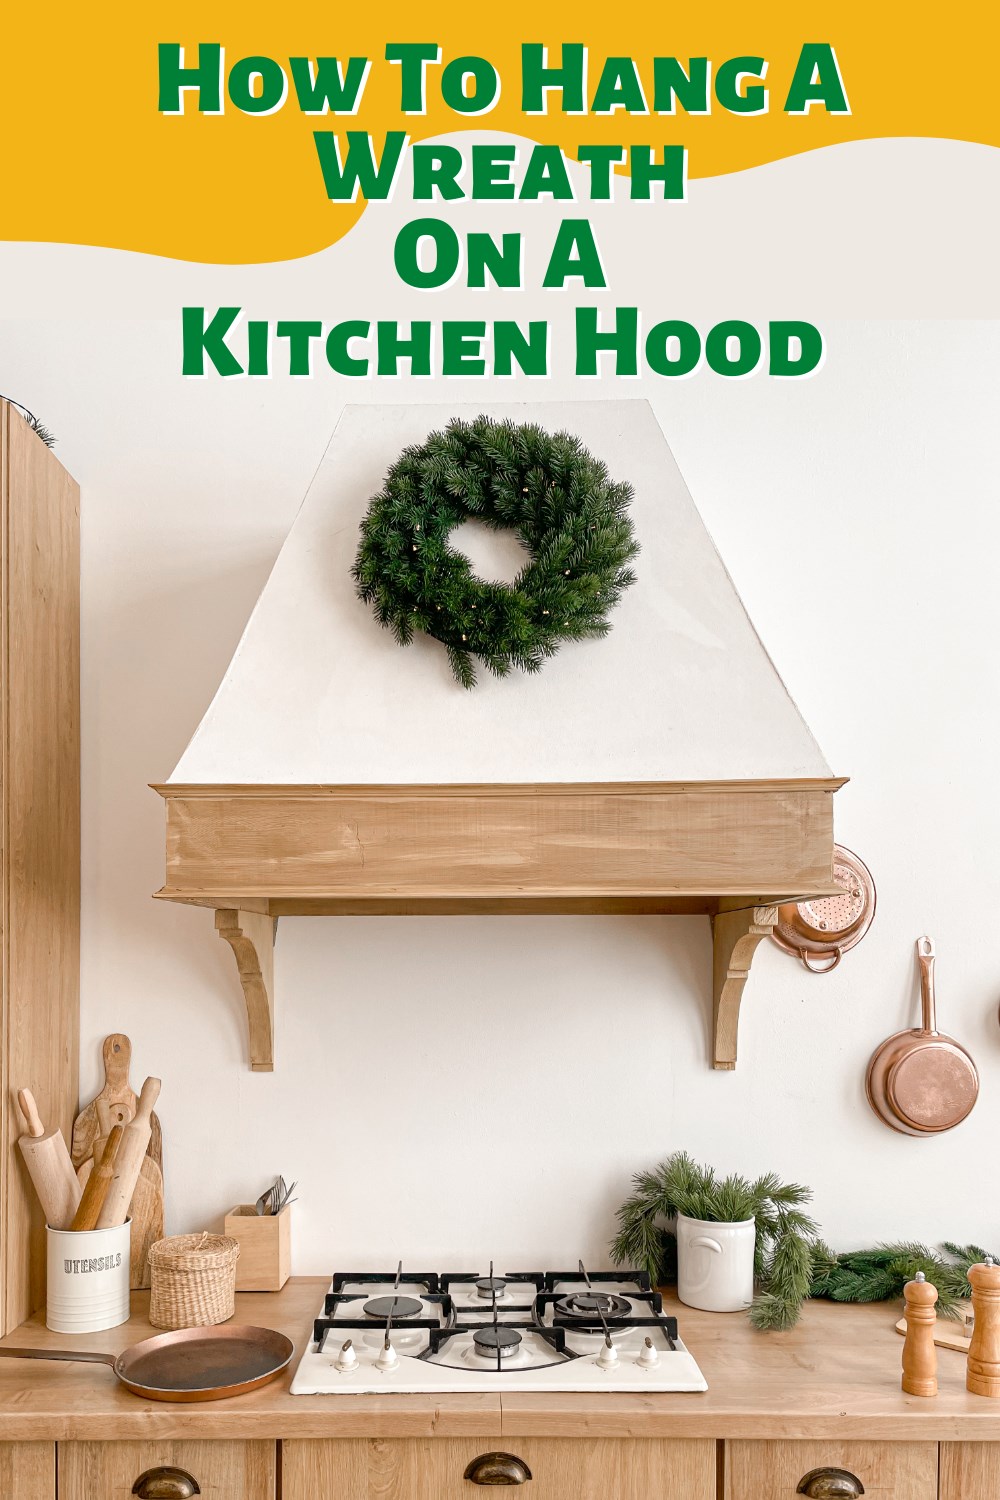 Follow these instruction to hang a wreath on a kitchen hood